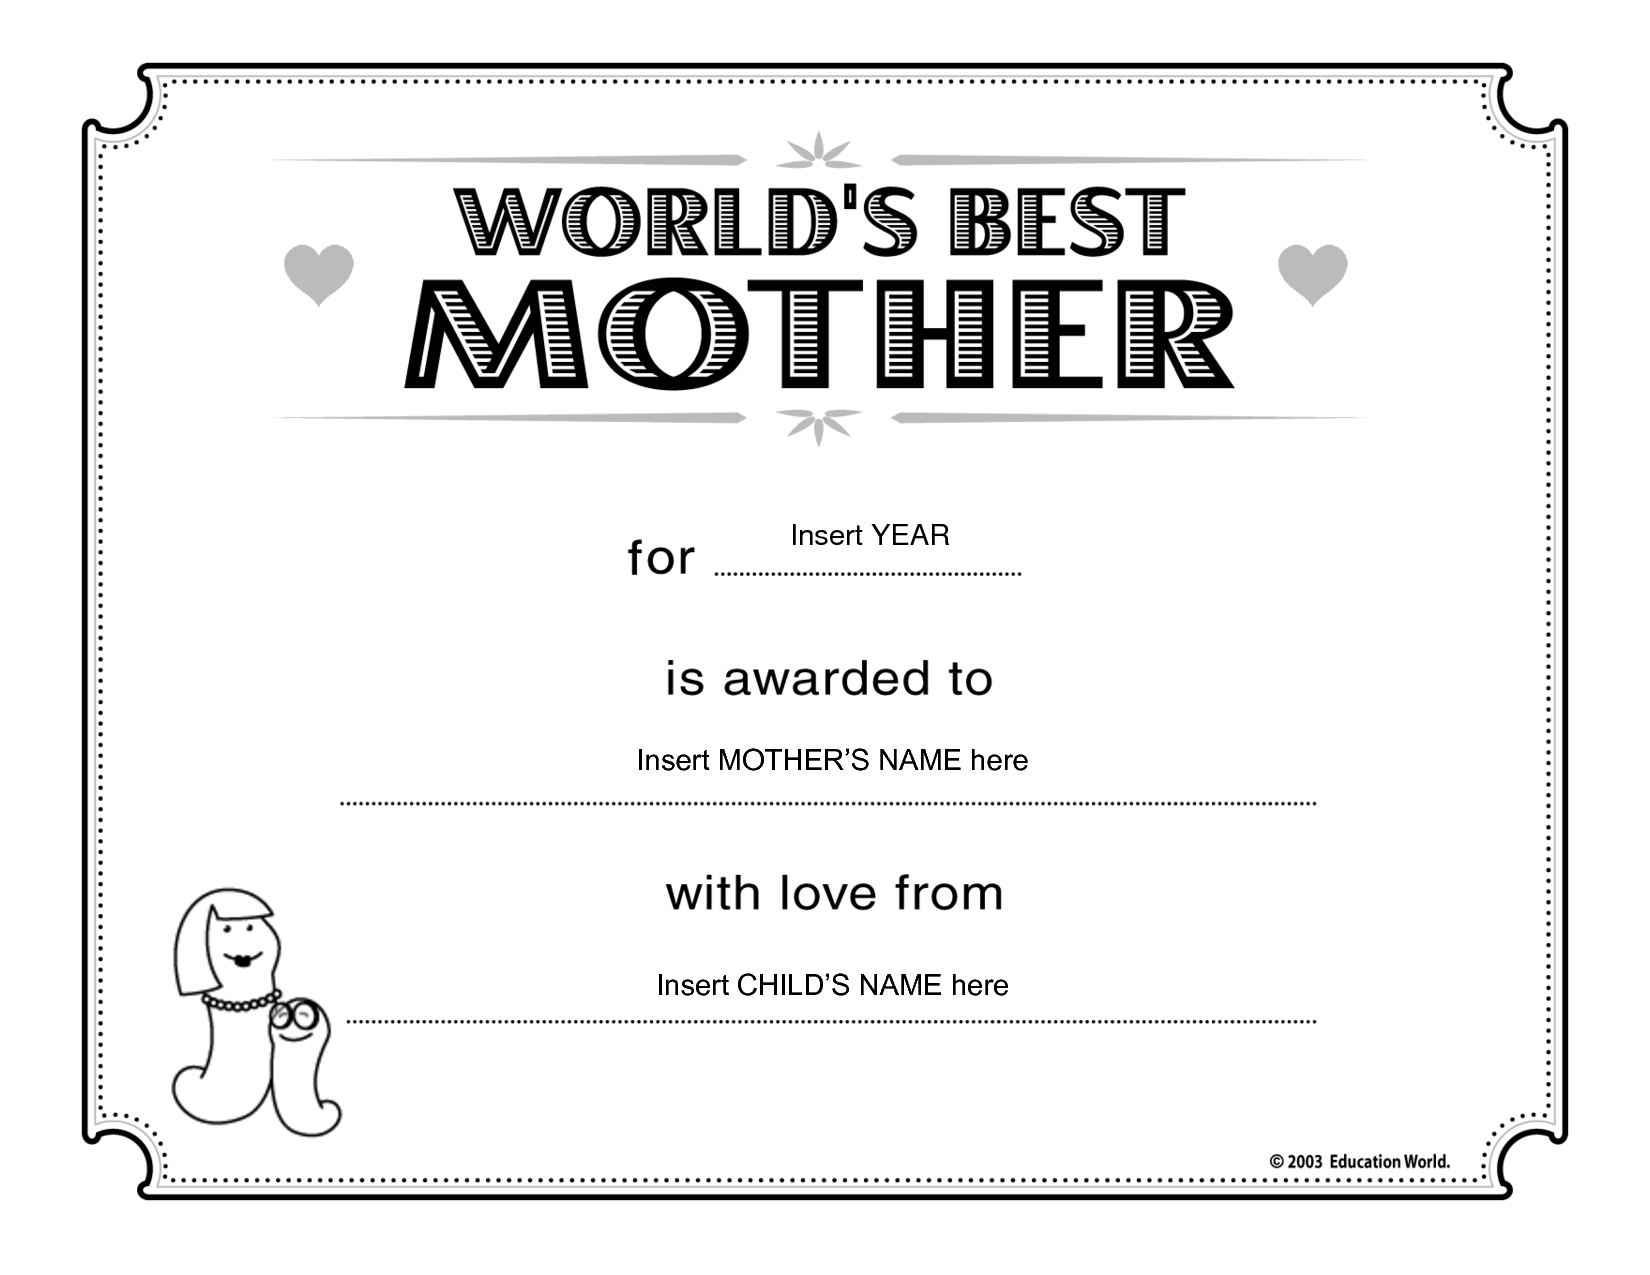 8 Best Images of World's Best Mom Certificate Printable Best Mom